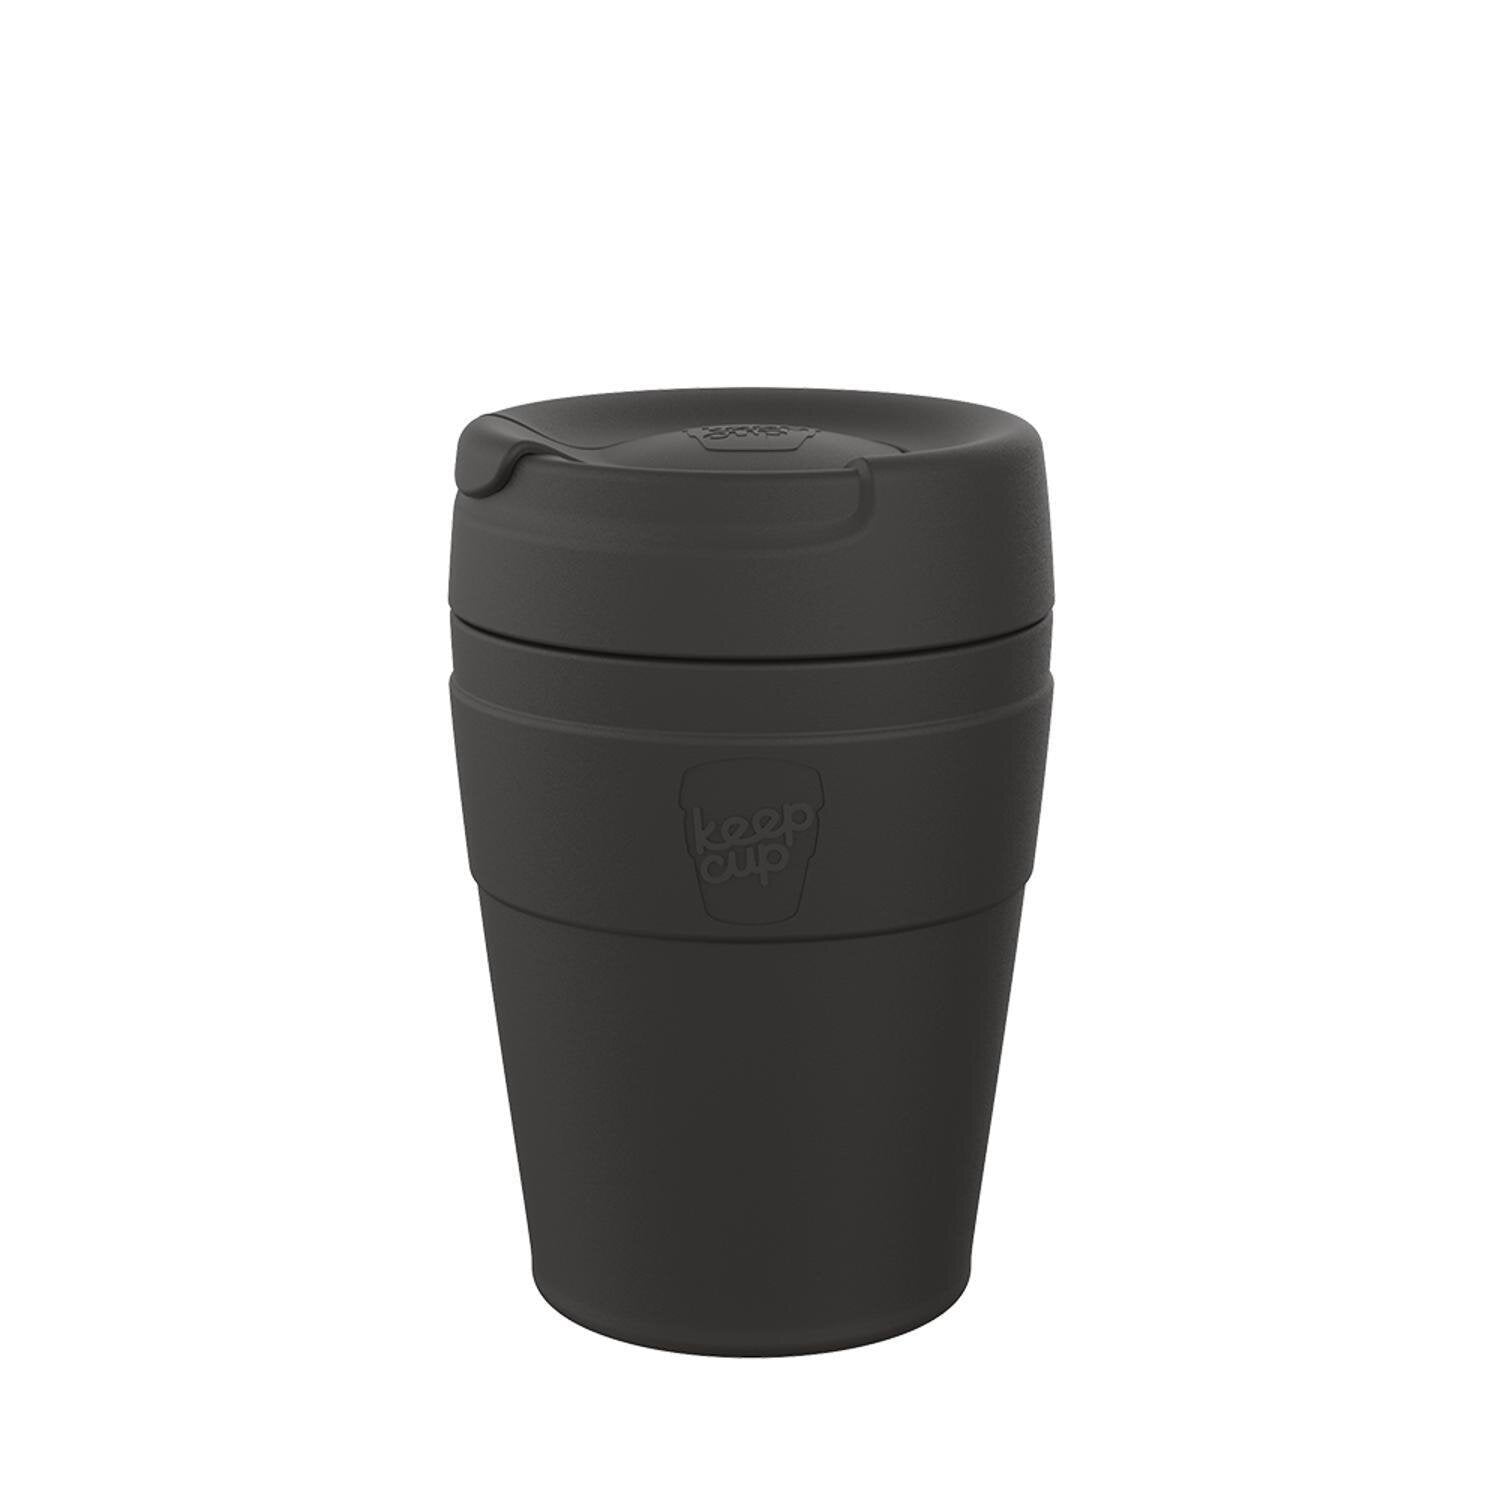 KeepCup releases new Helix range of reusable cups and bottles